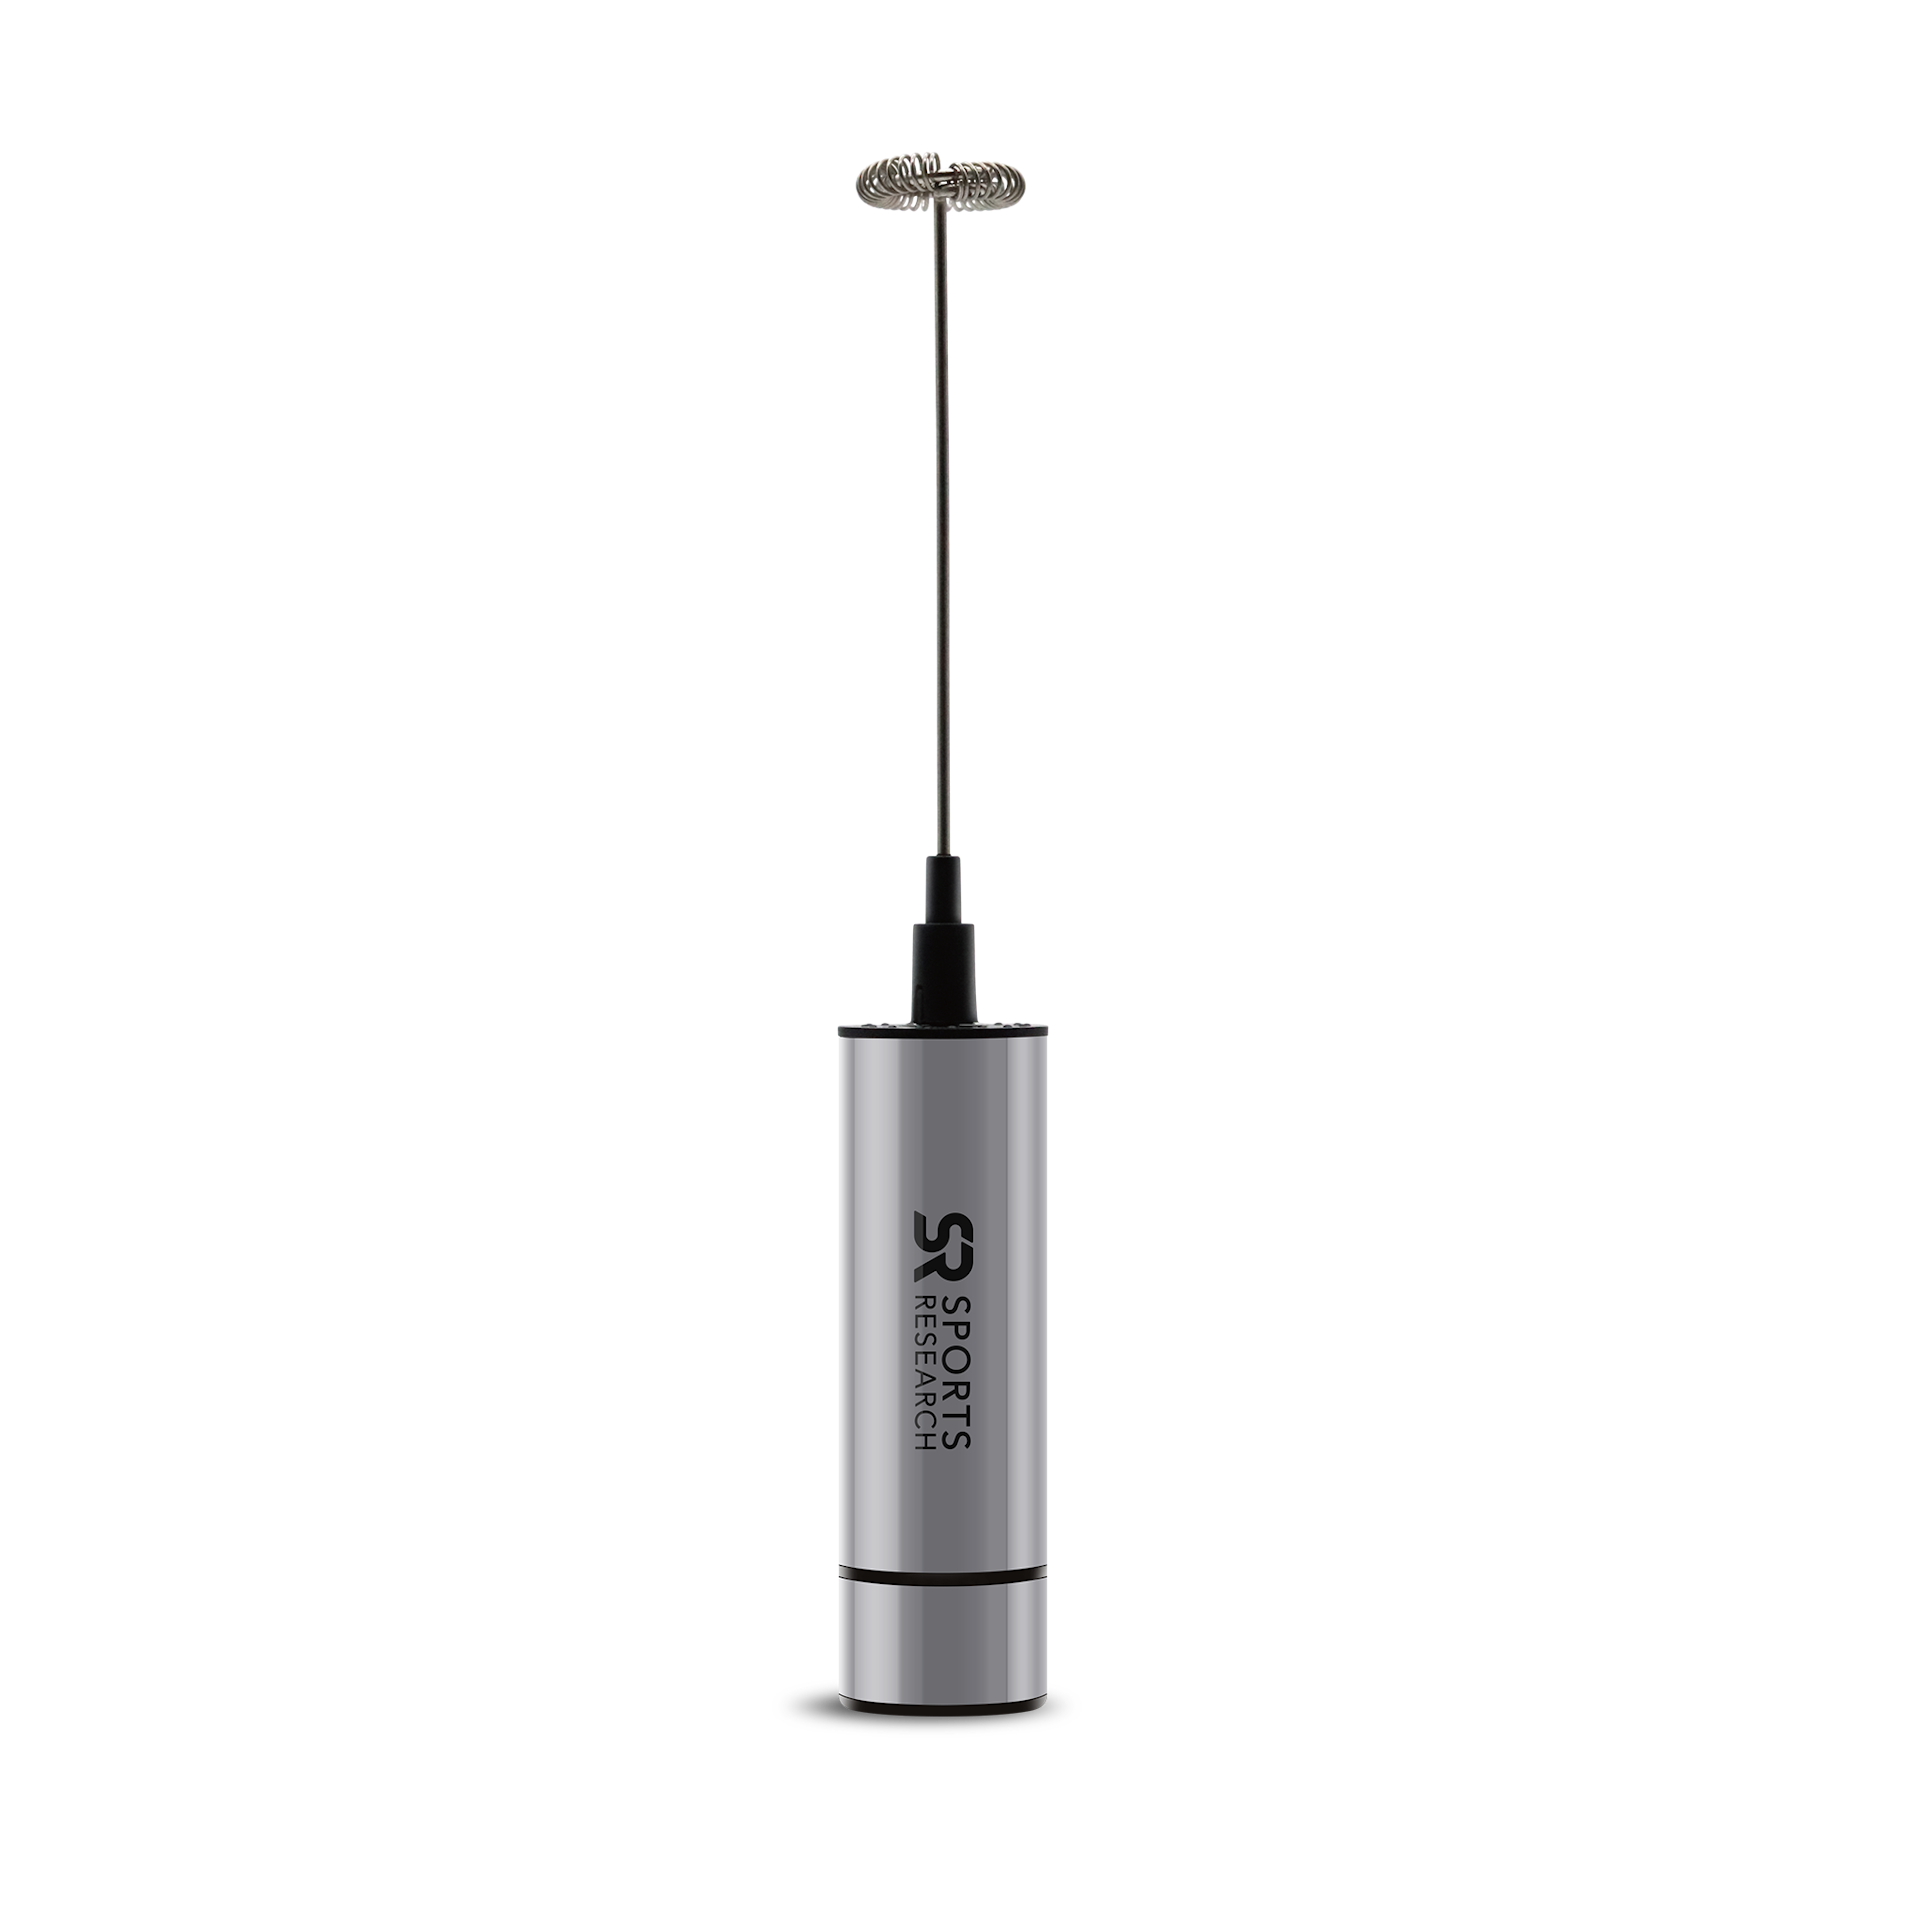 Sports Research Premium Drink Mixer - Stainless Steel Frother, Silver